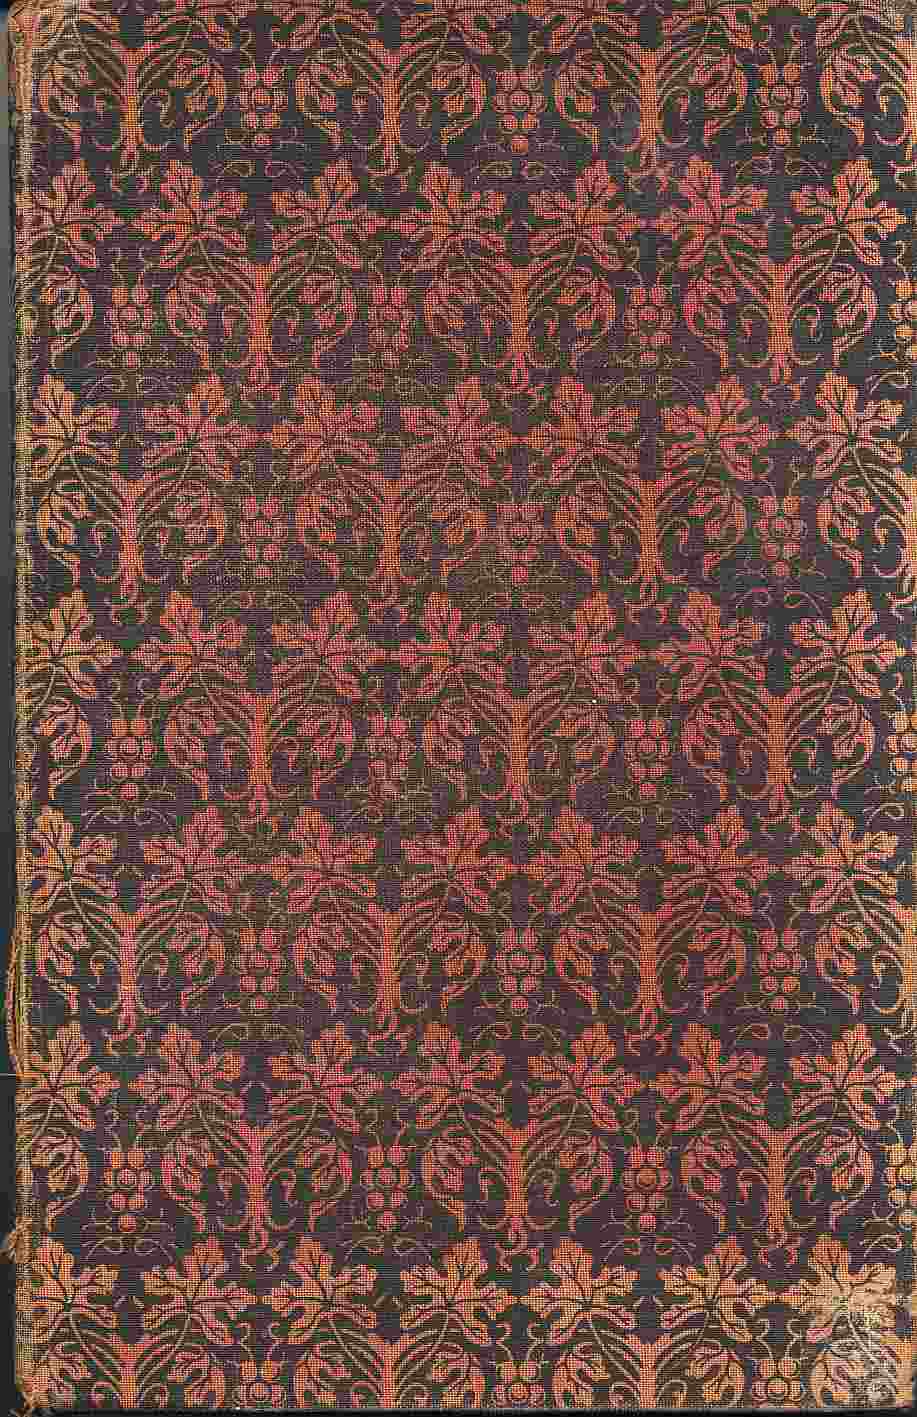 KHAYYM, OMAR - Rubiyt of Omar KhayyM; Translated Into English Quatrains by Edward Fitzgerald. A Complete Reprint of the First Edition and the Combined Third, Fourth and Fifth Editions, with an Appendix Containing Fitzgerald's Prefaces and Notes.